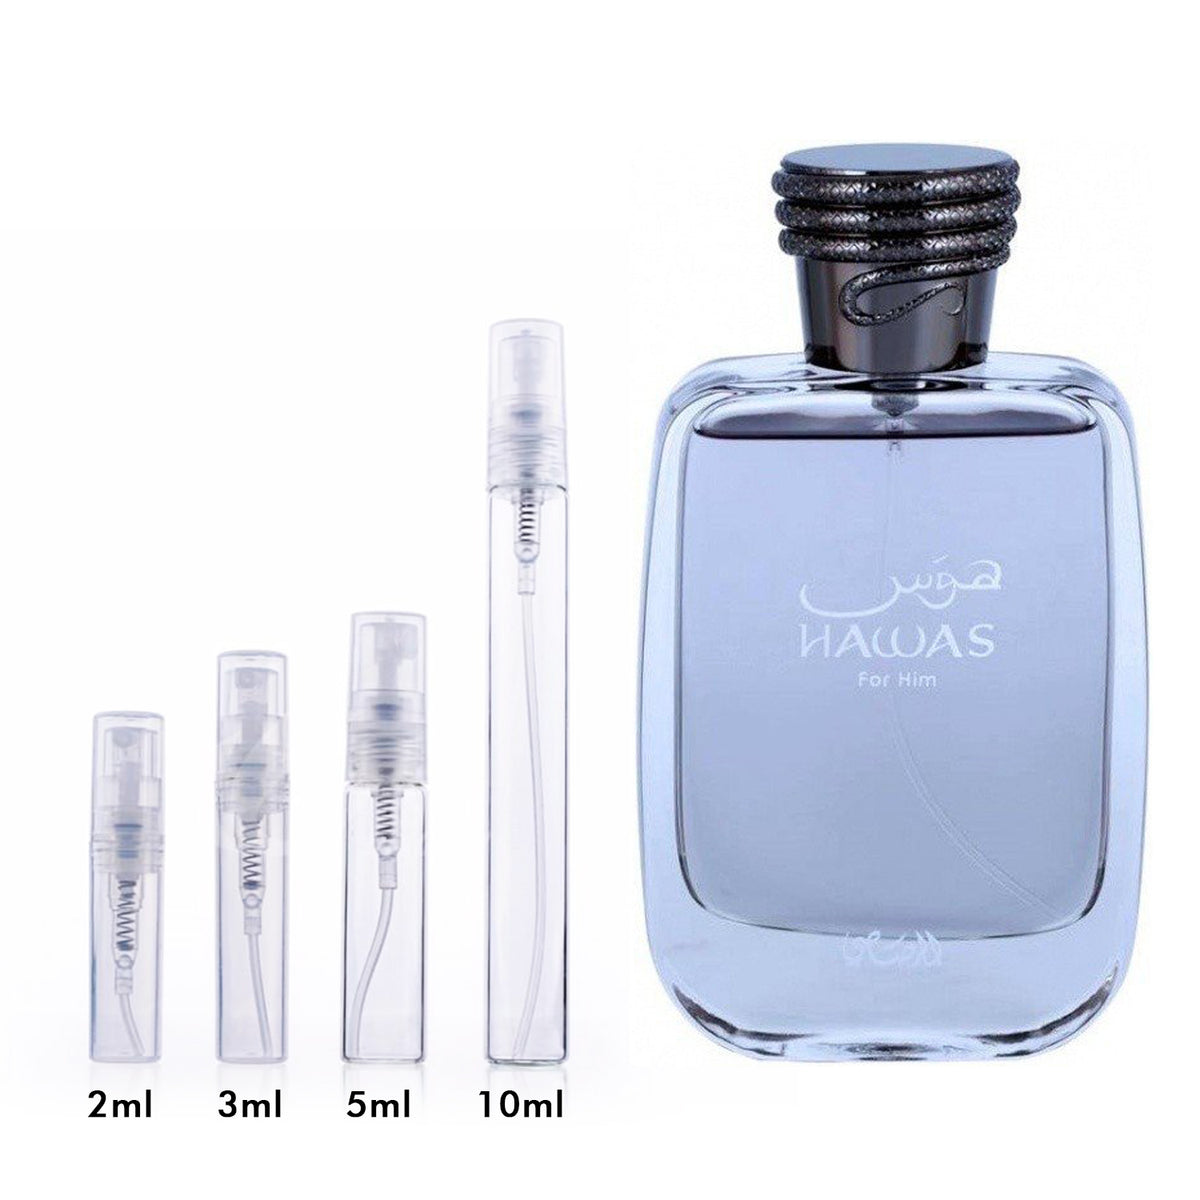 Hawas For Him by Rasasi Fragrance Samples, DecantX